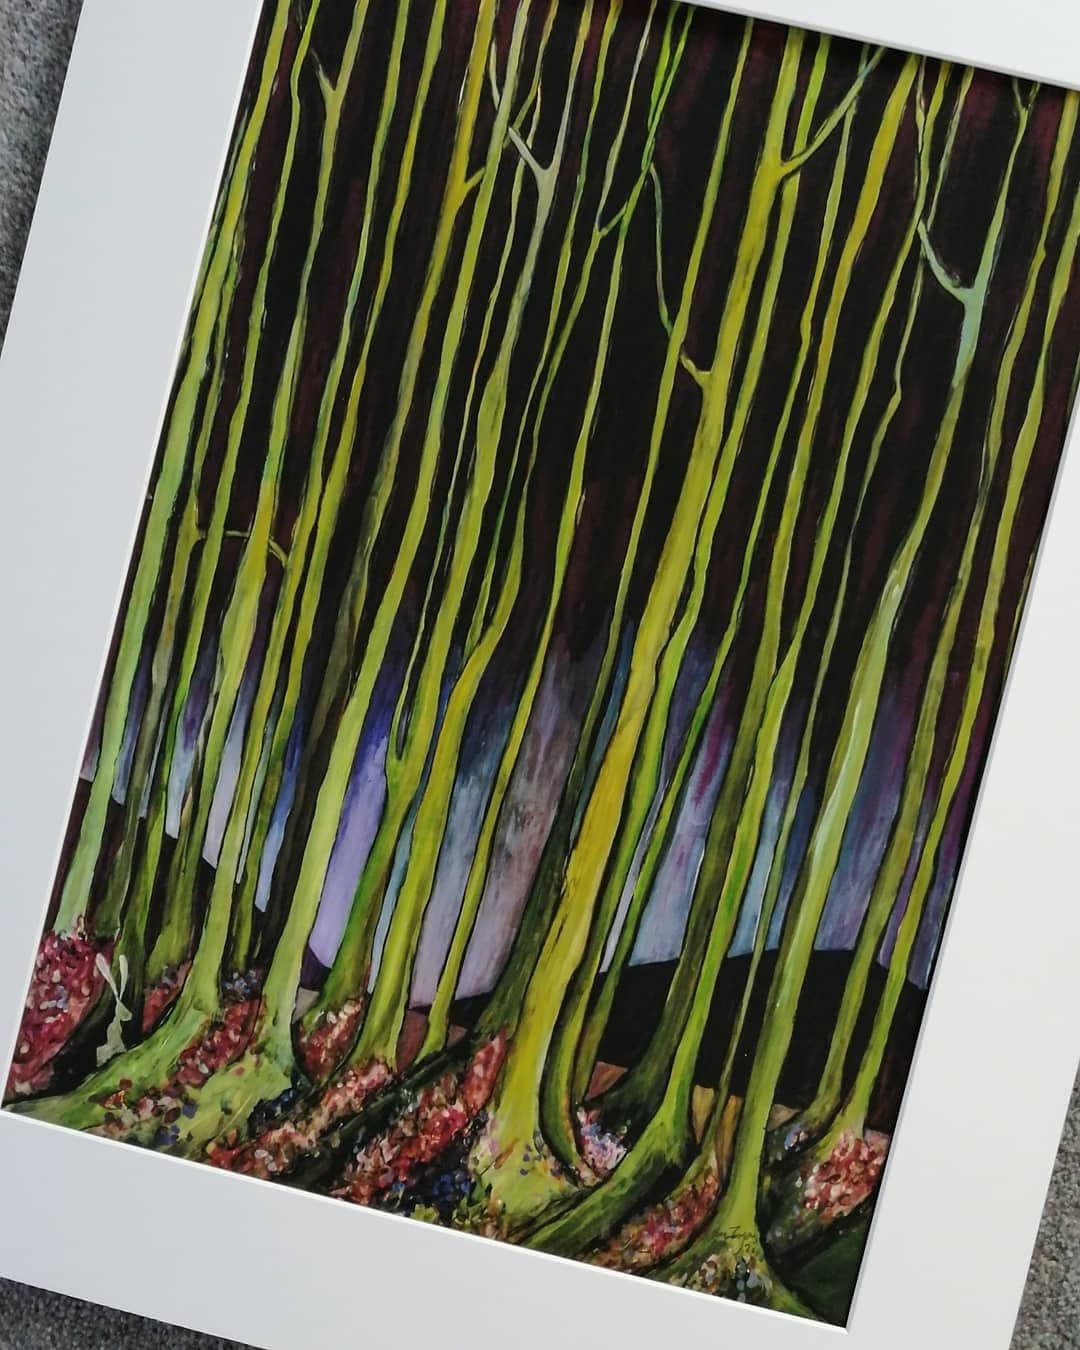 Evening Stroll. Printed Art on A3 297mm wide by 420mm high. Dispatched worldwide in a sturdy tube by tracked delivery.